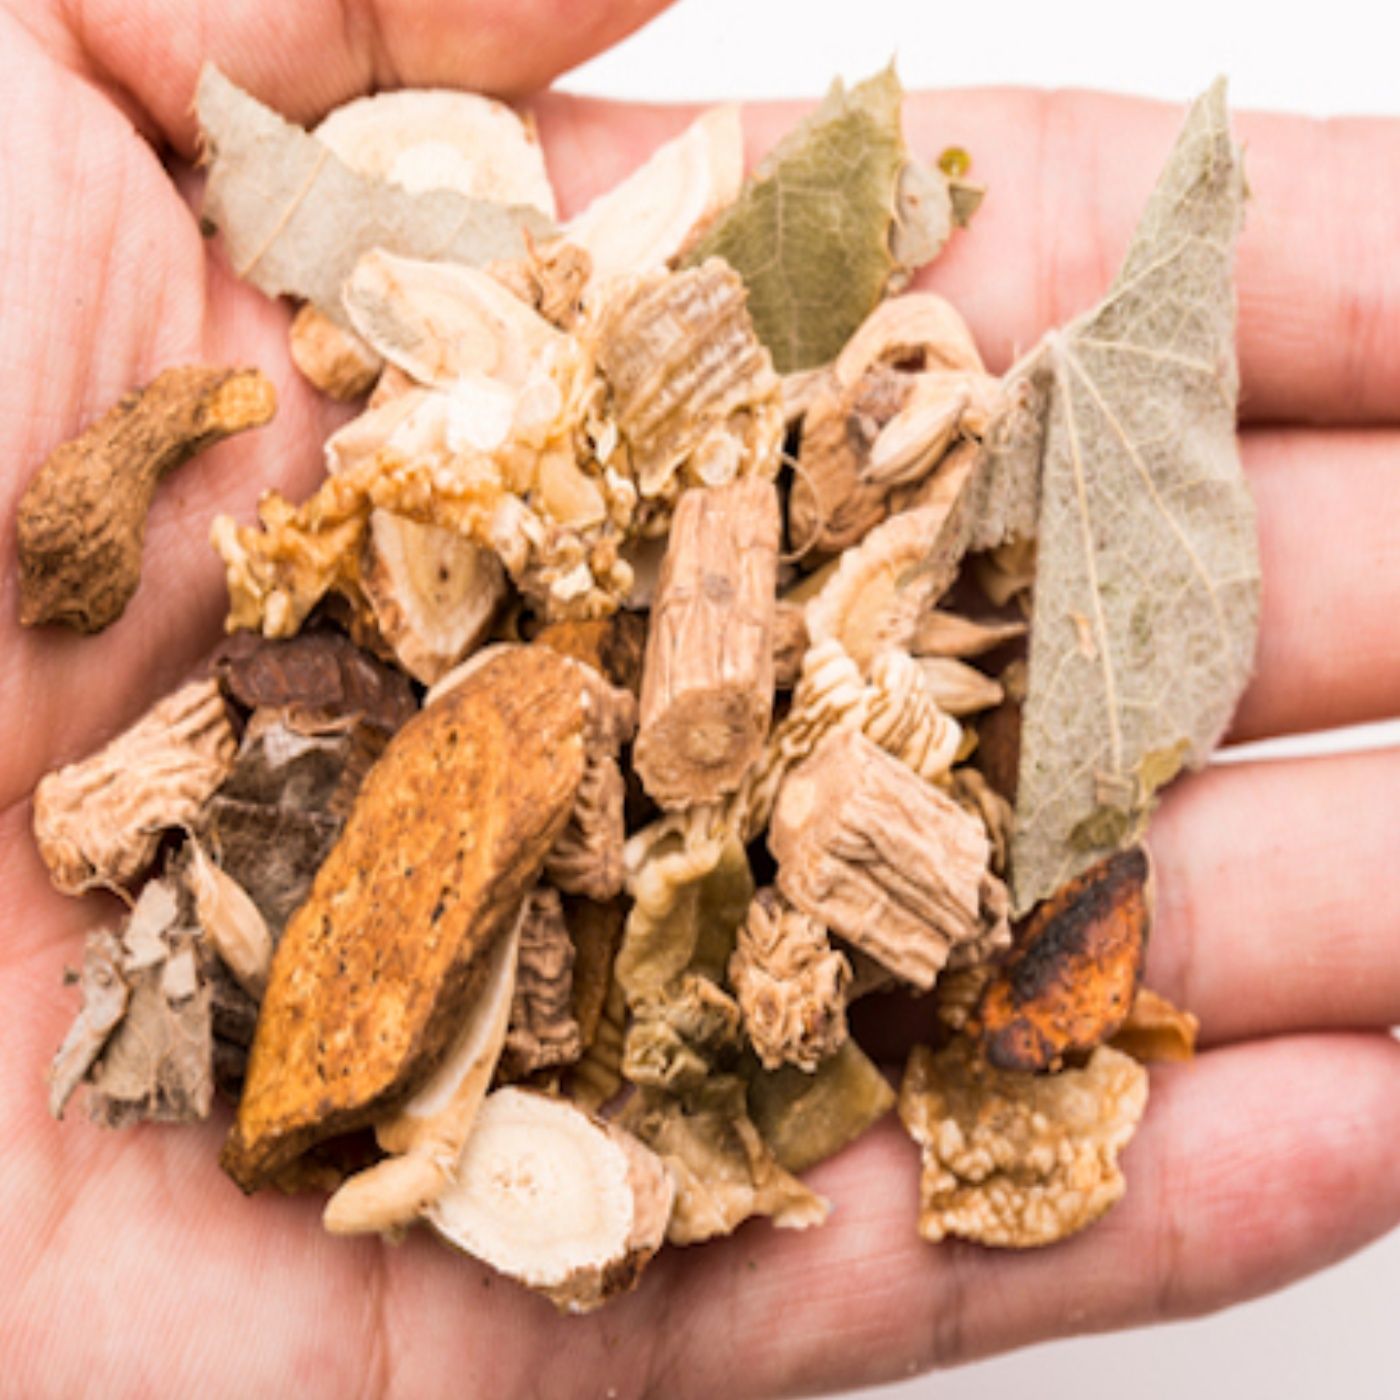 Chinese Herbs For Pets - Dr Barbara Fougere